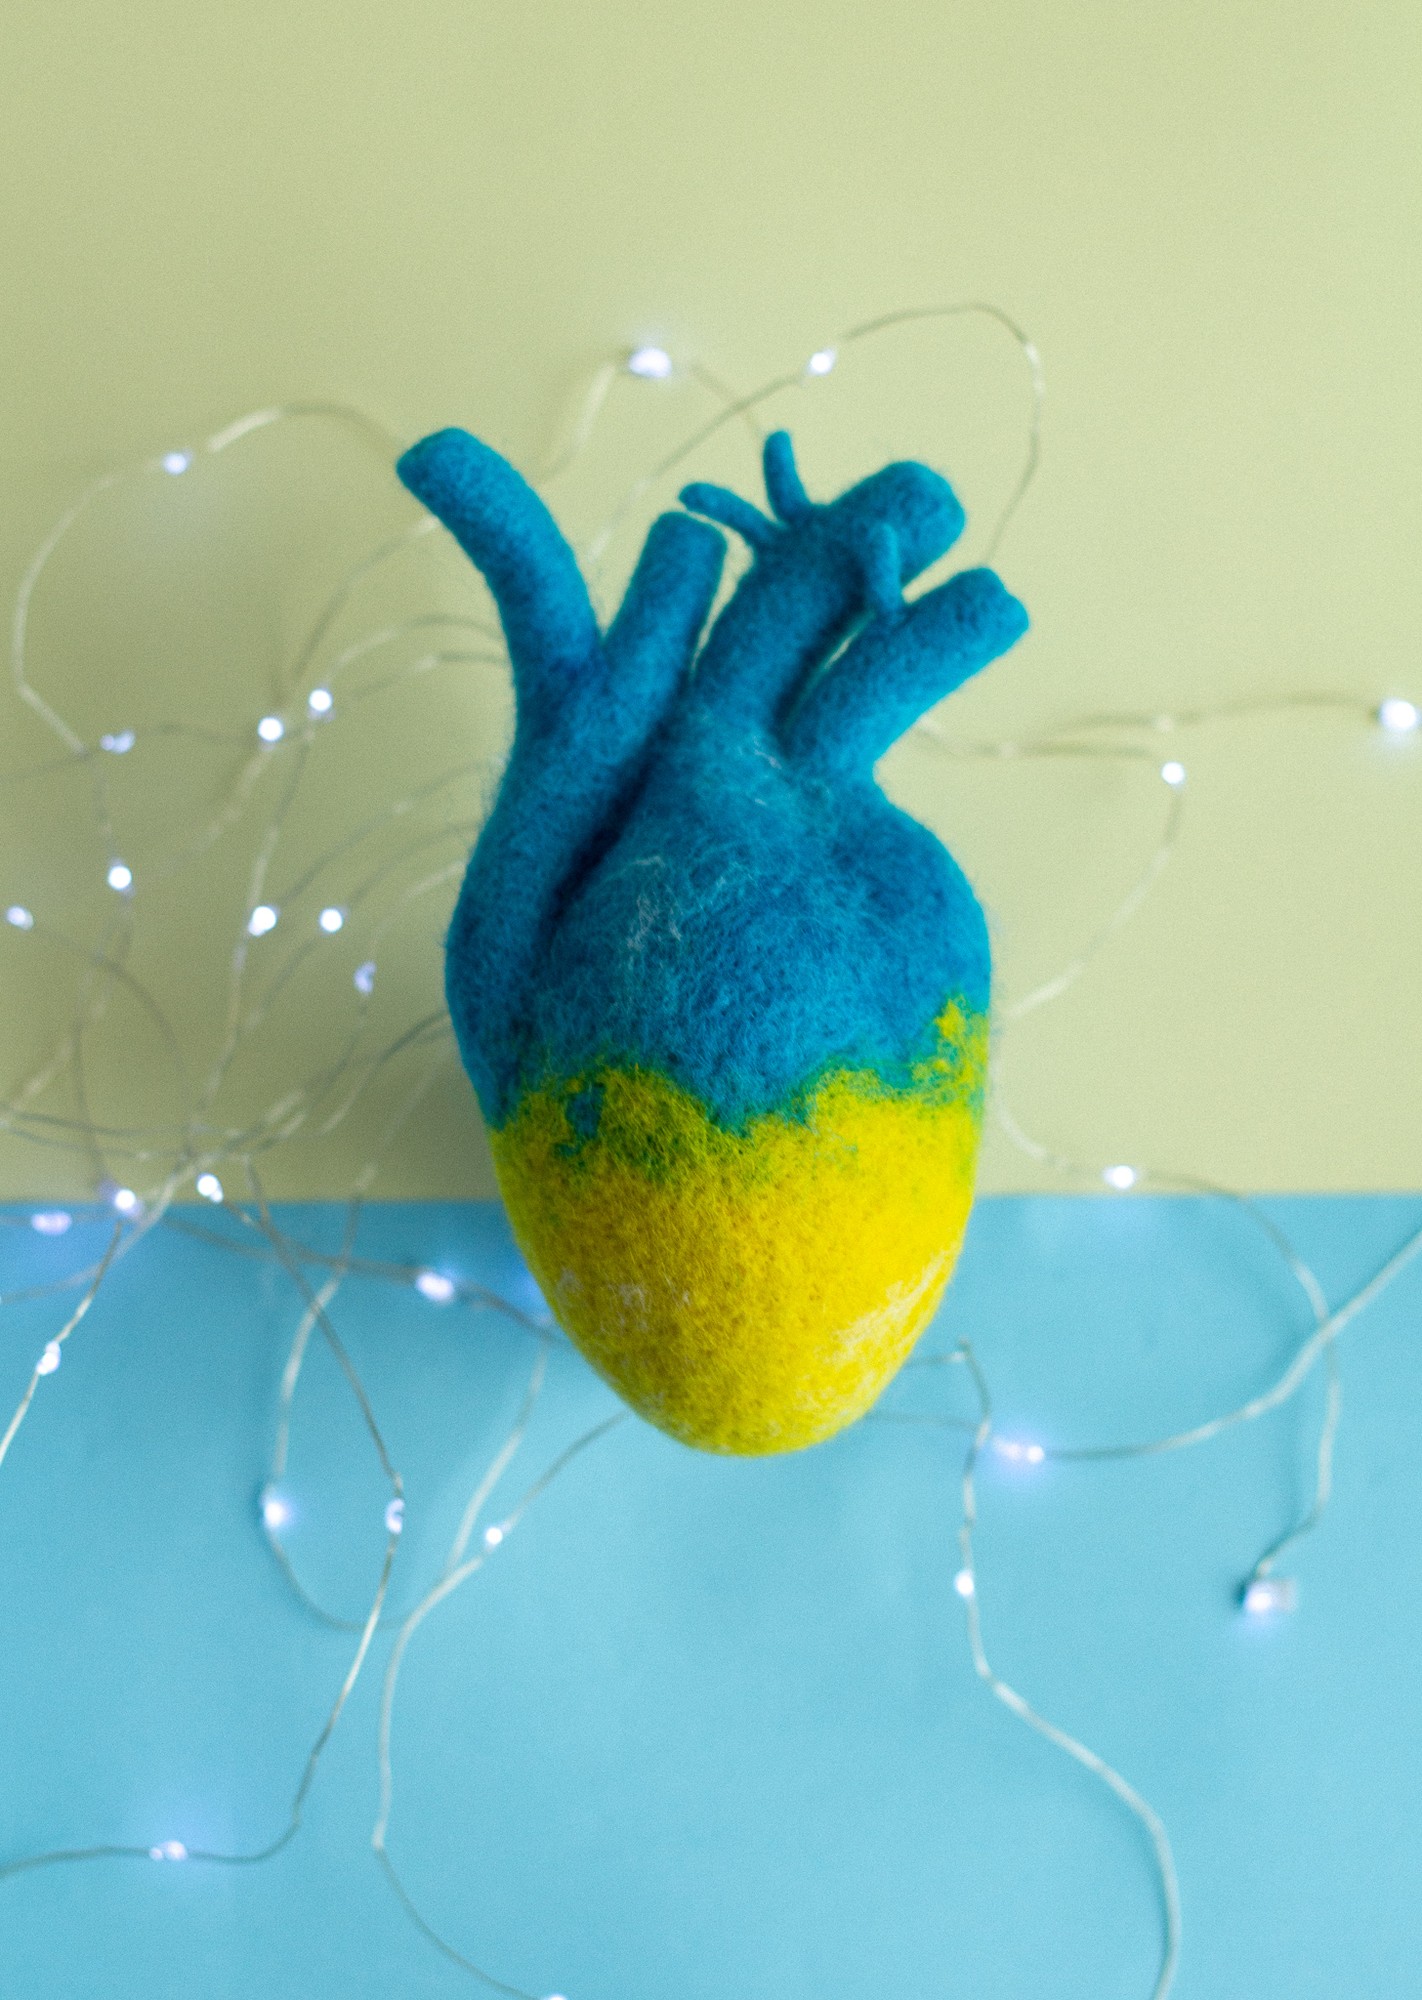 Anatomical heart "With Ukraine in the heart" in the color of the Ukrainian blue-yellow flag